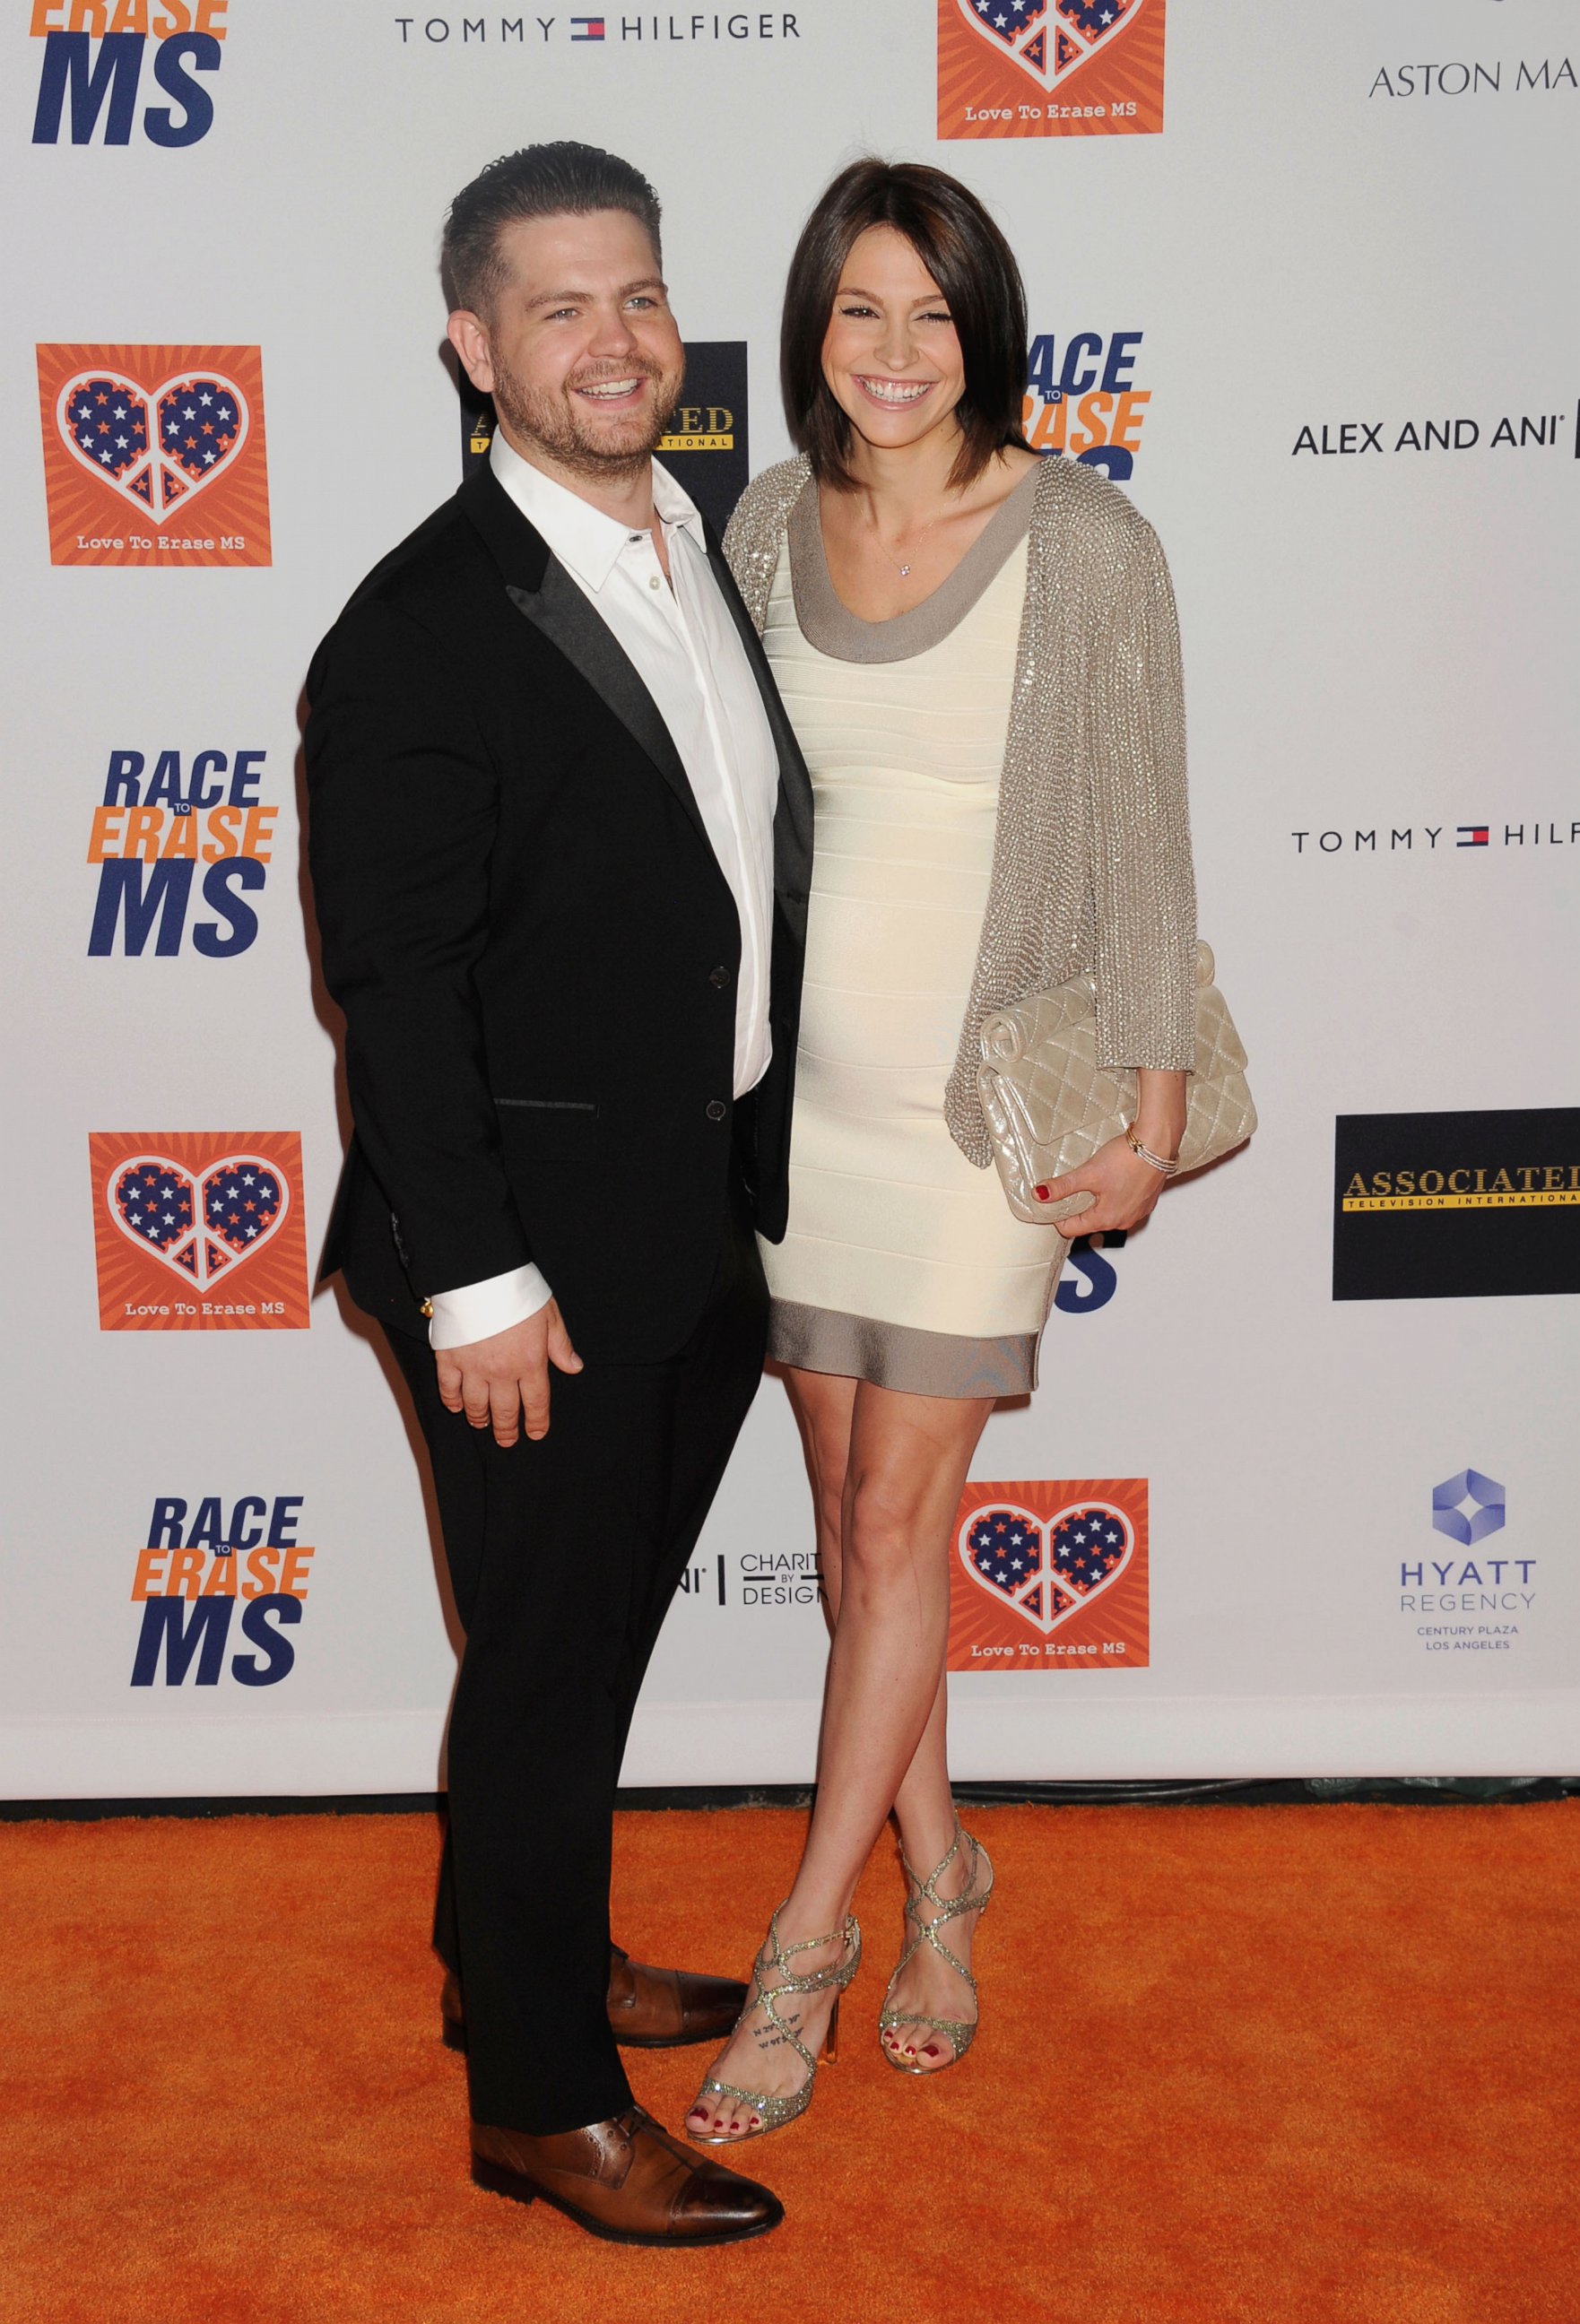 PHOTO: TV personality Jack Osbourne and wife Lisa Osbourne arrive at the 22nd Annual Race To Erase MS at the Hyatt Regency Century Plaza, on April 24, 2015, in Century City, California.